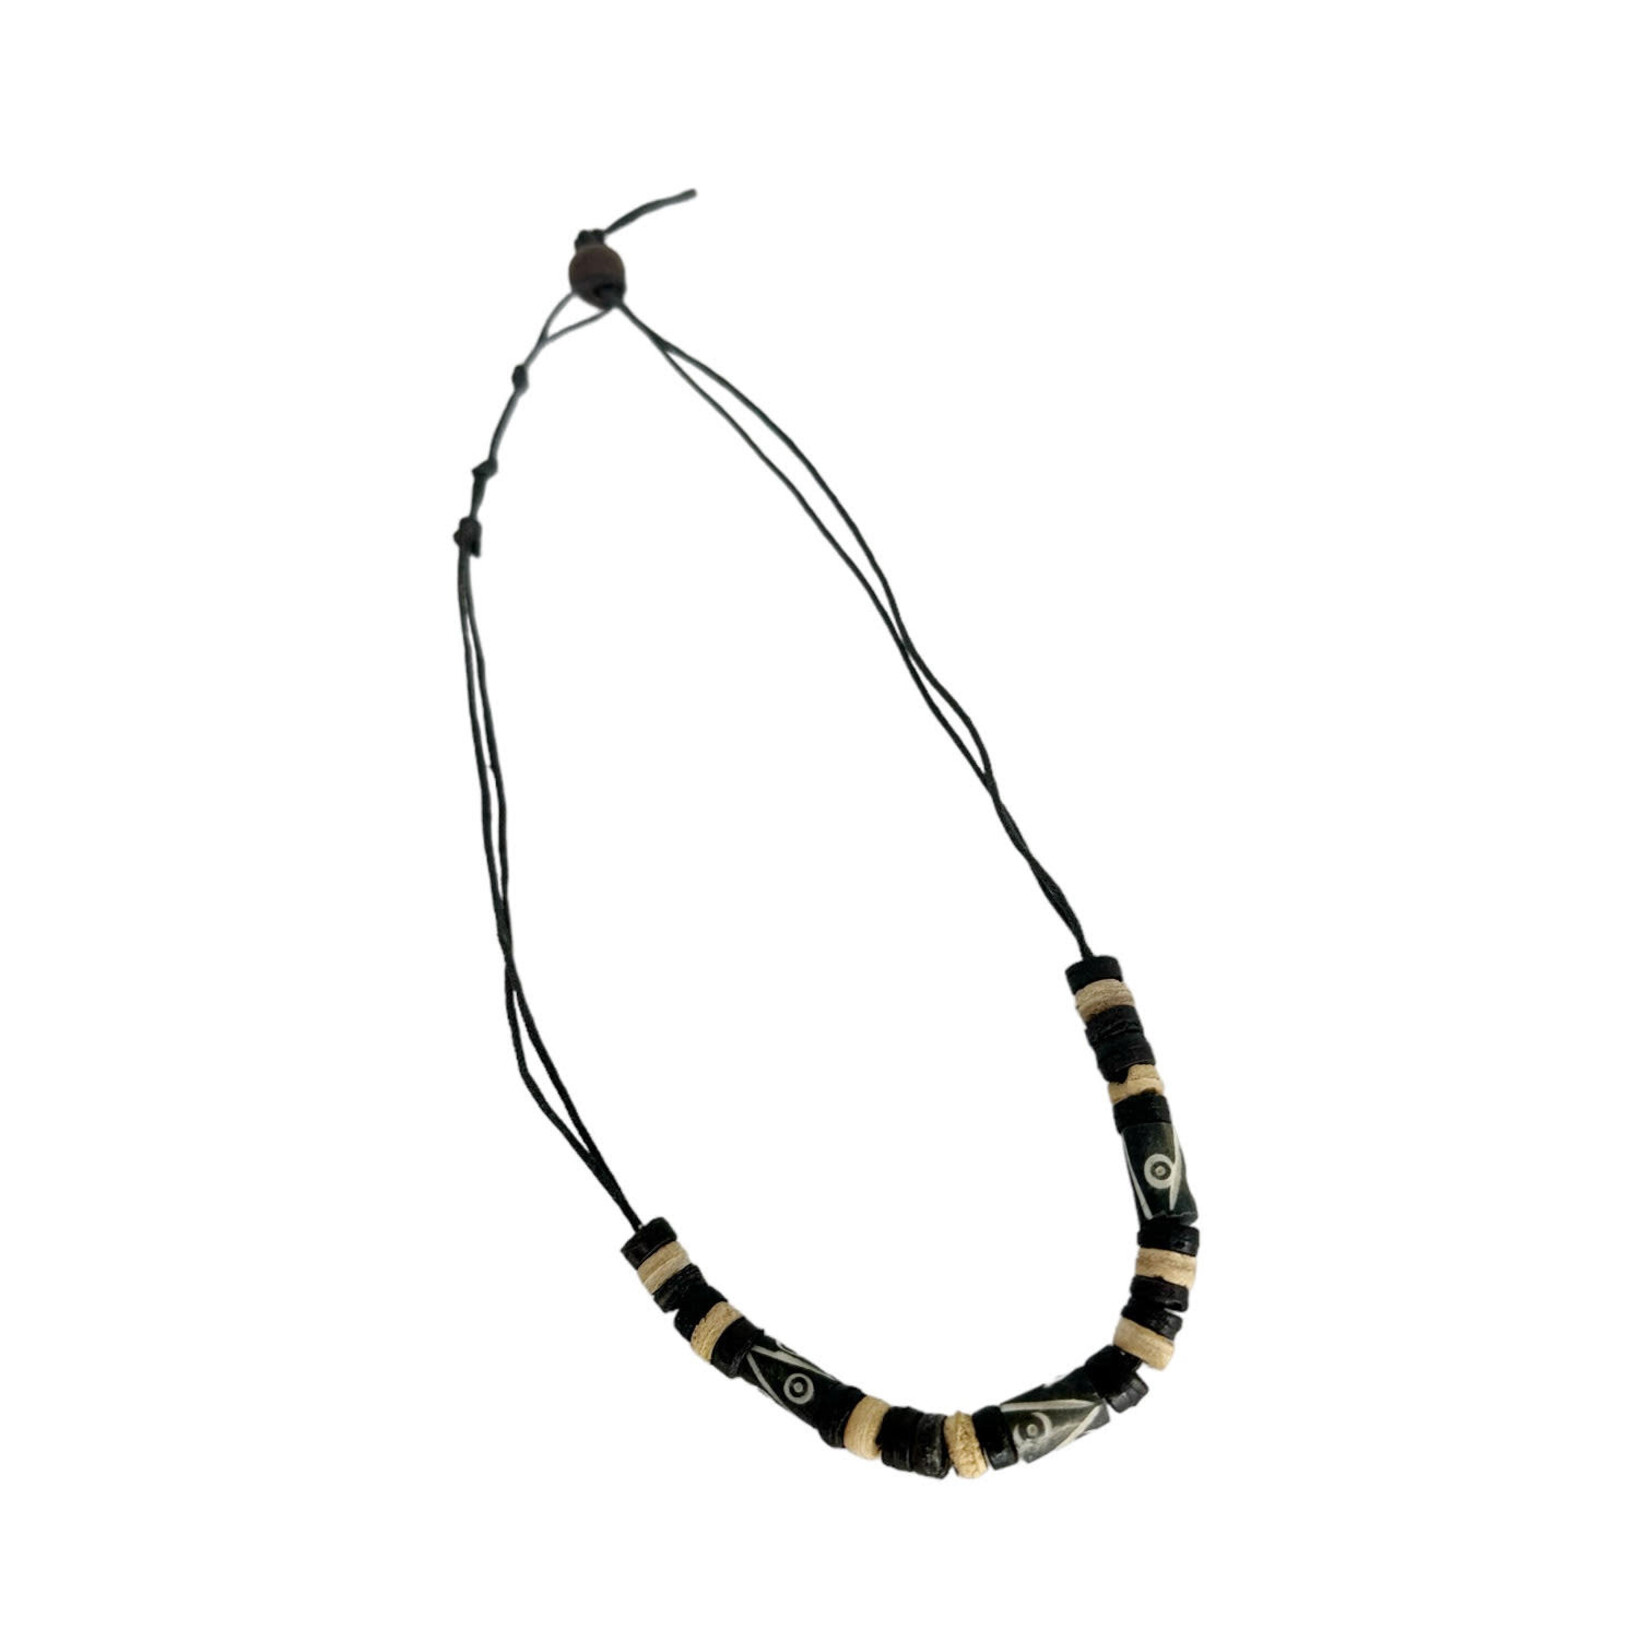 Wood Bead Black Cord Necklace with Wood Bead Clasp